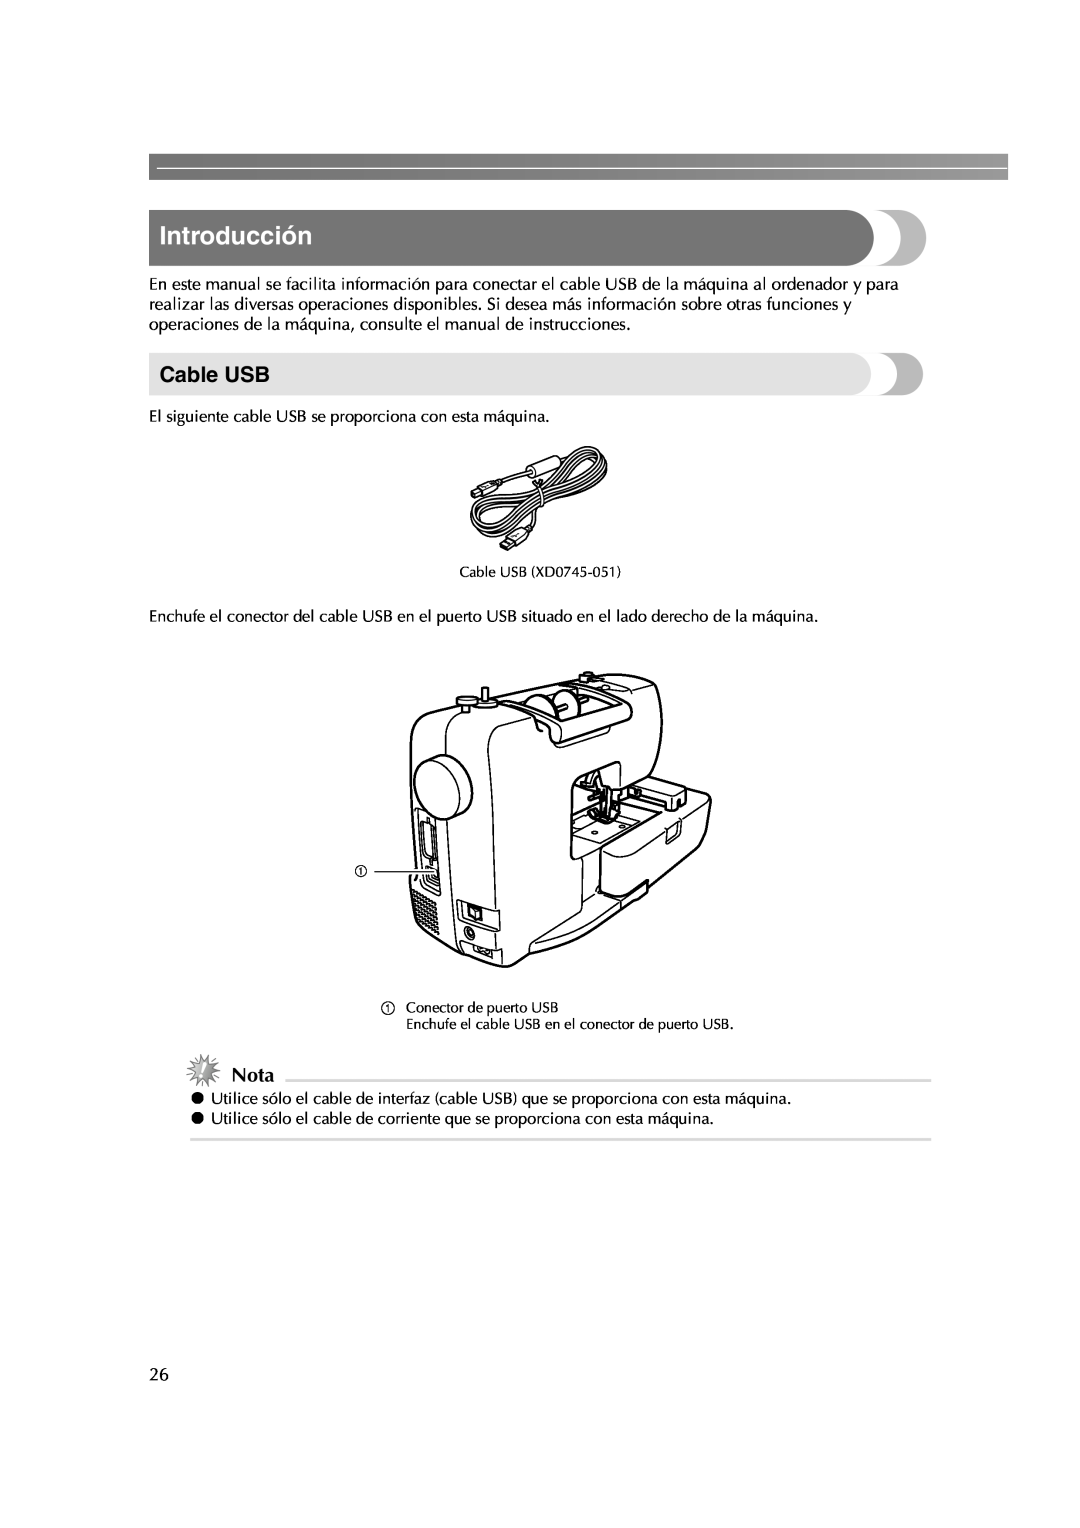 Brother HE-240 instruction manual Introducción, Cable USB, Nota 